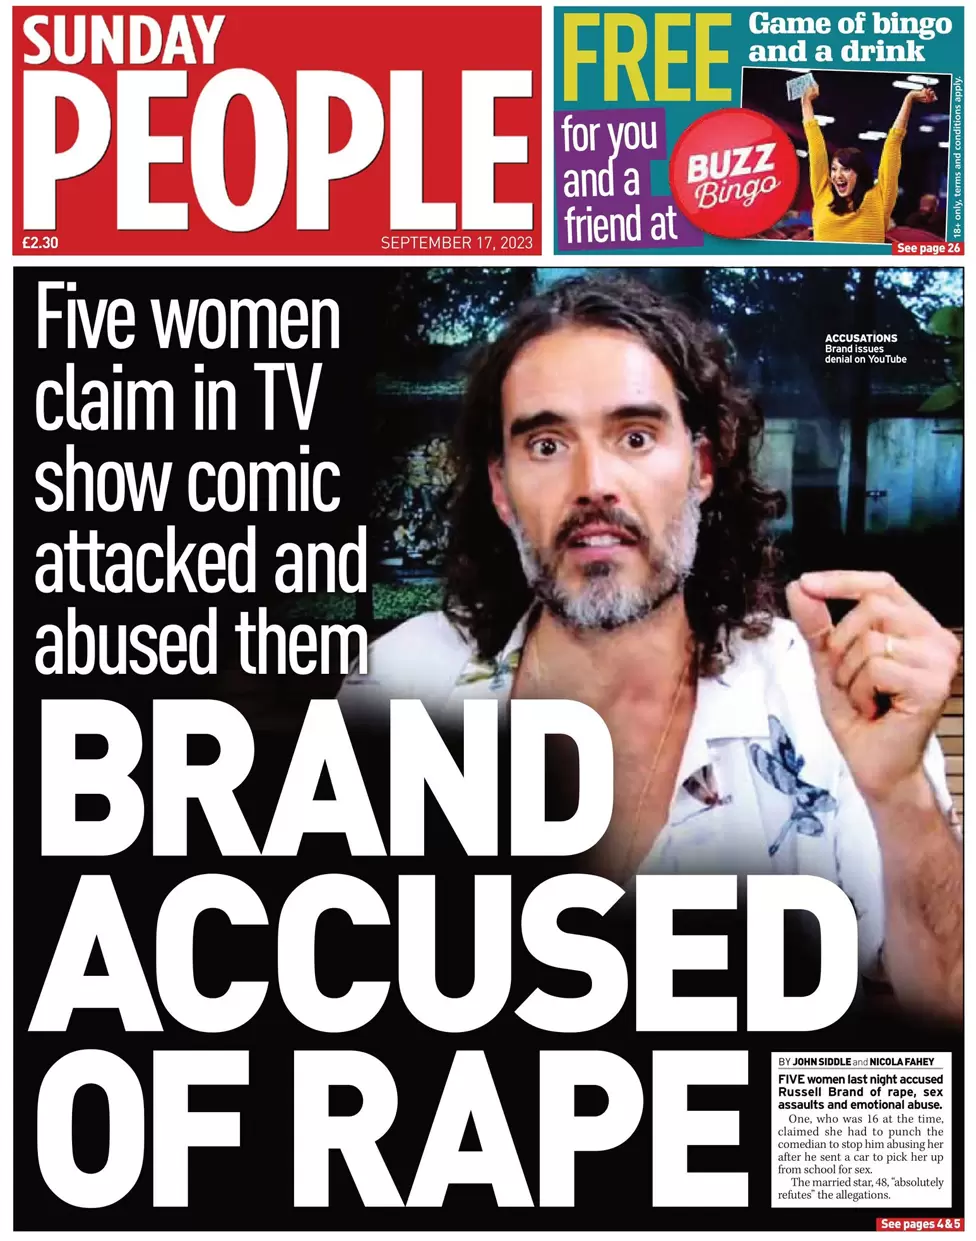 Sunday People - Five women claim in TV show comic attacked and abused them: Brand accused of rape